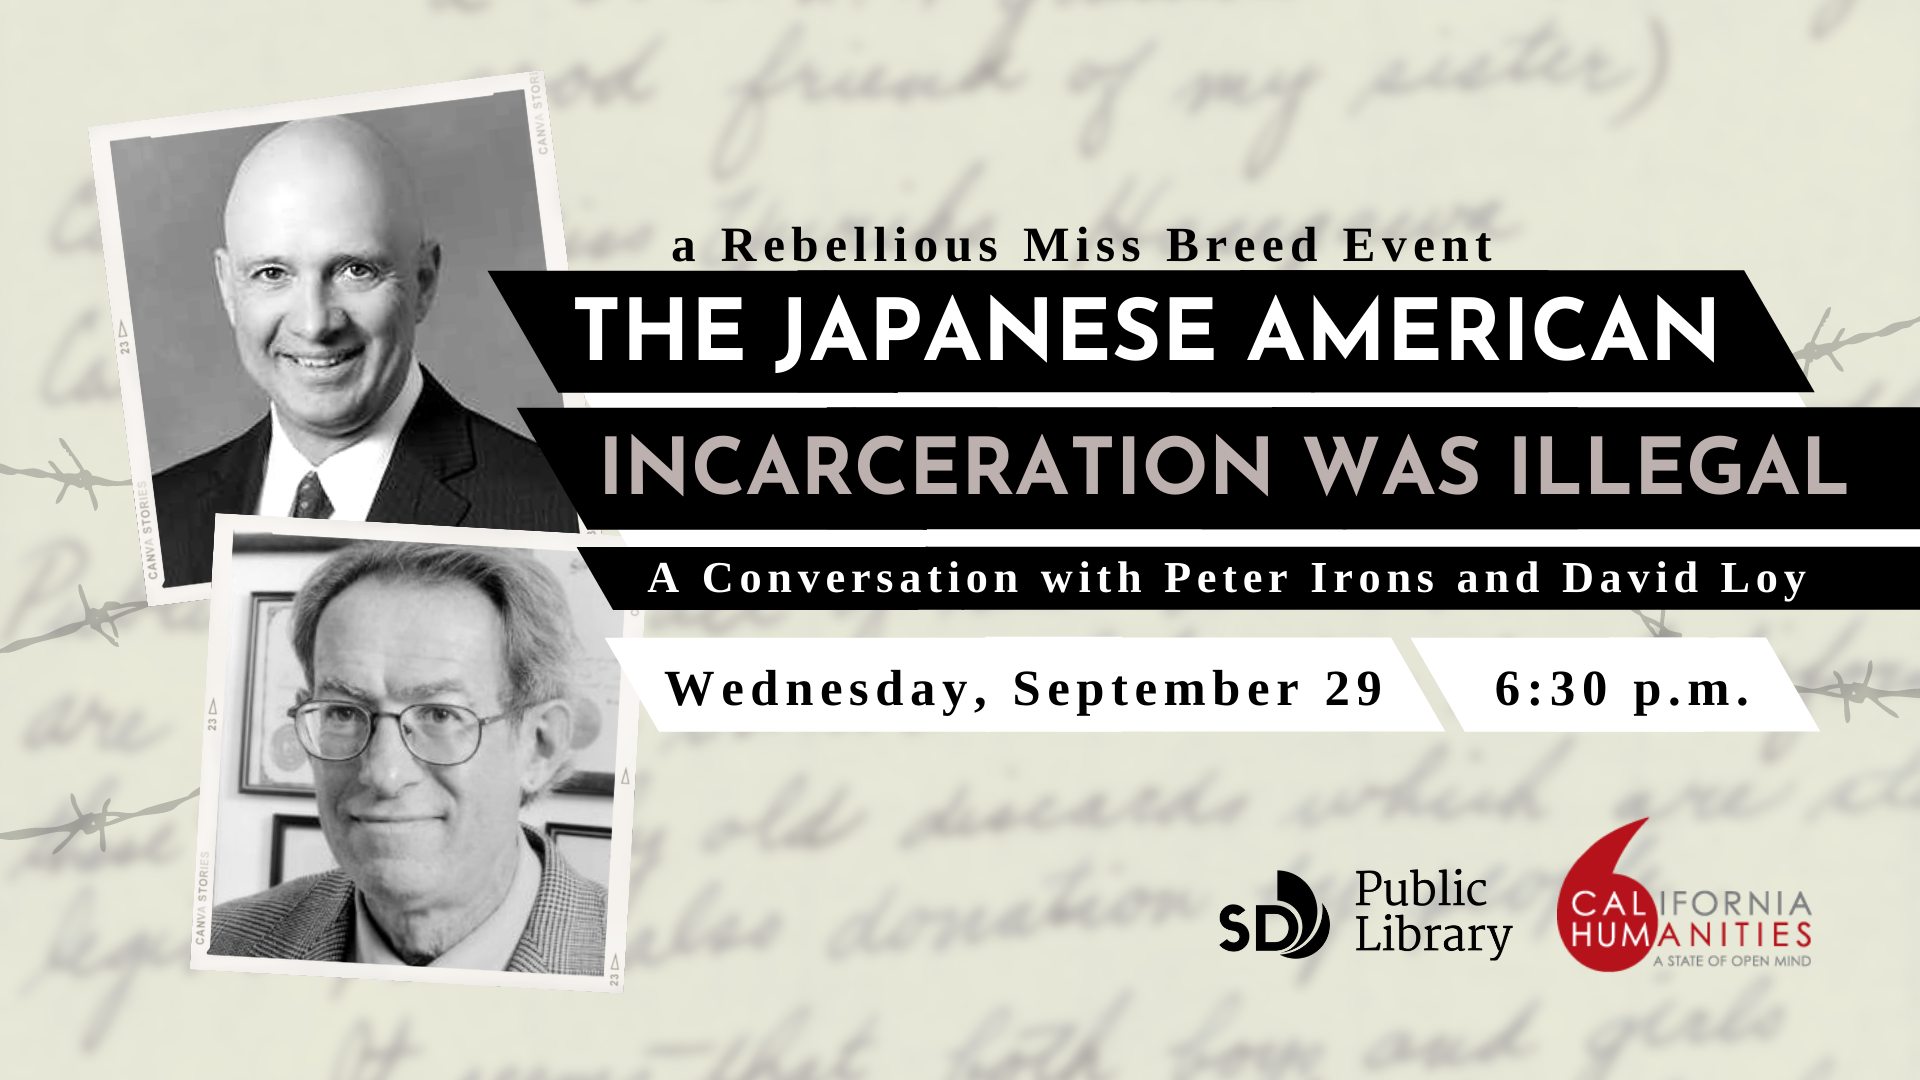 The Japanese American Incarceration was Illegal: a Conversation with Peter Irons & David Loy